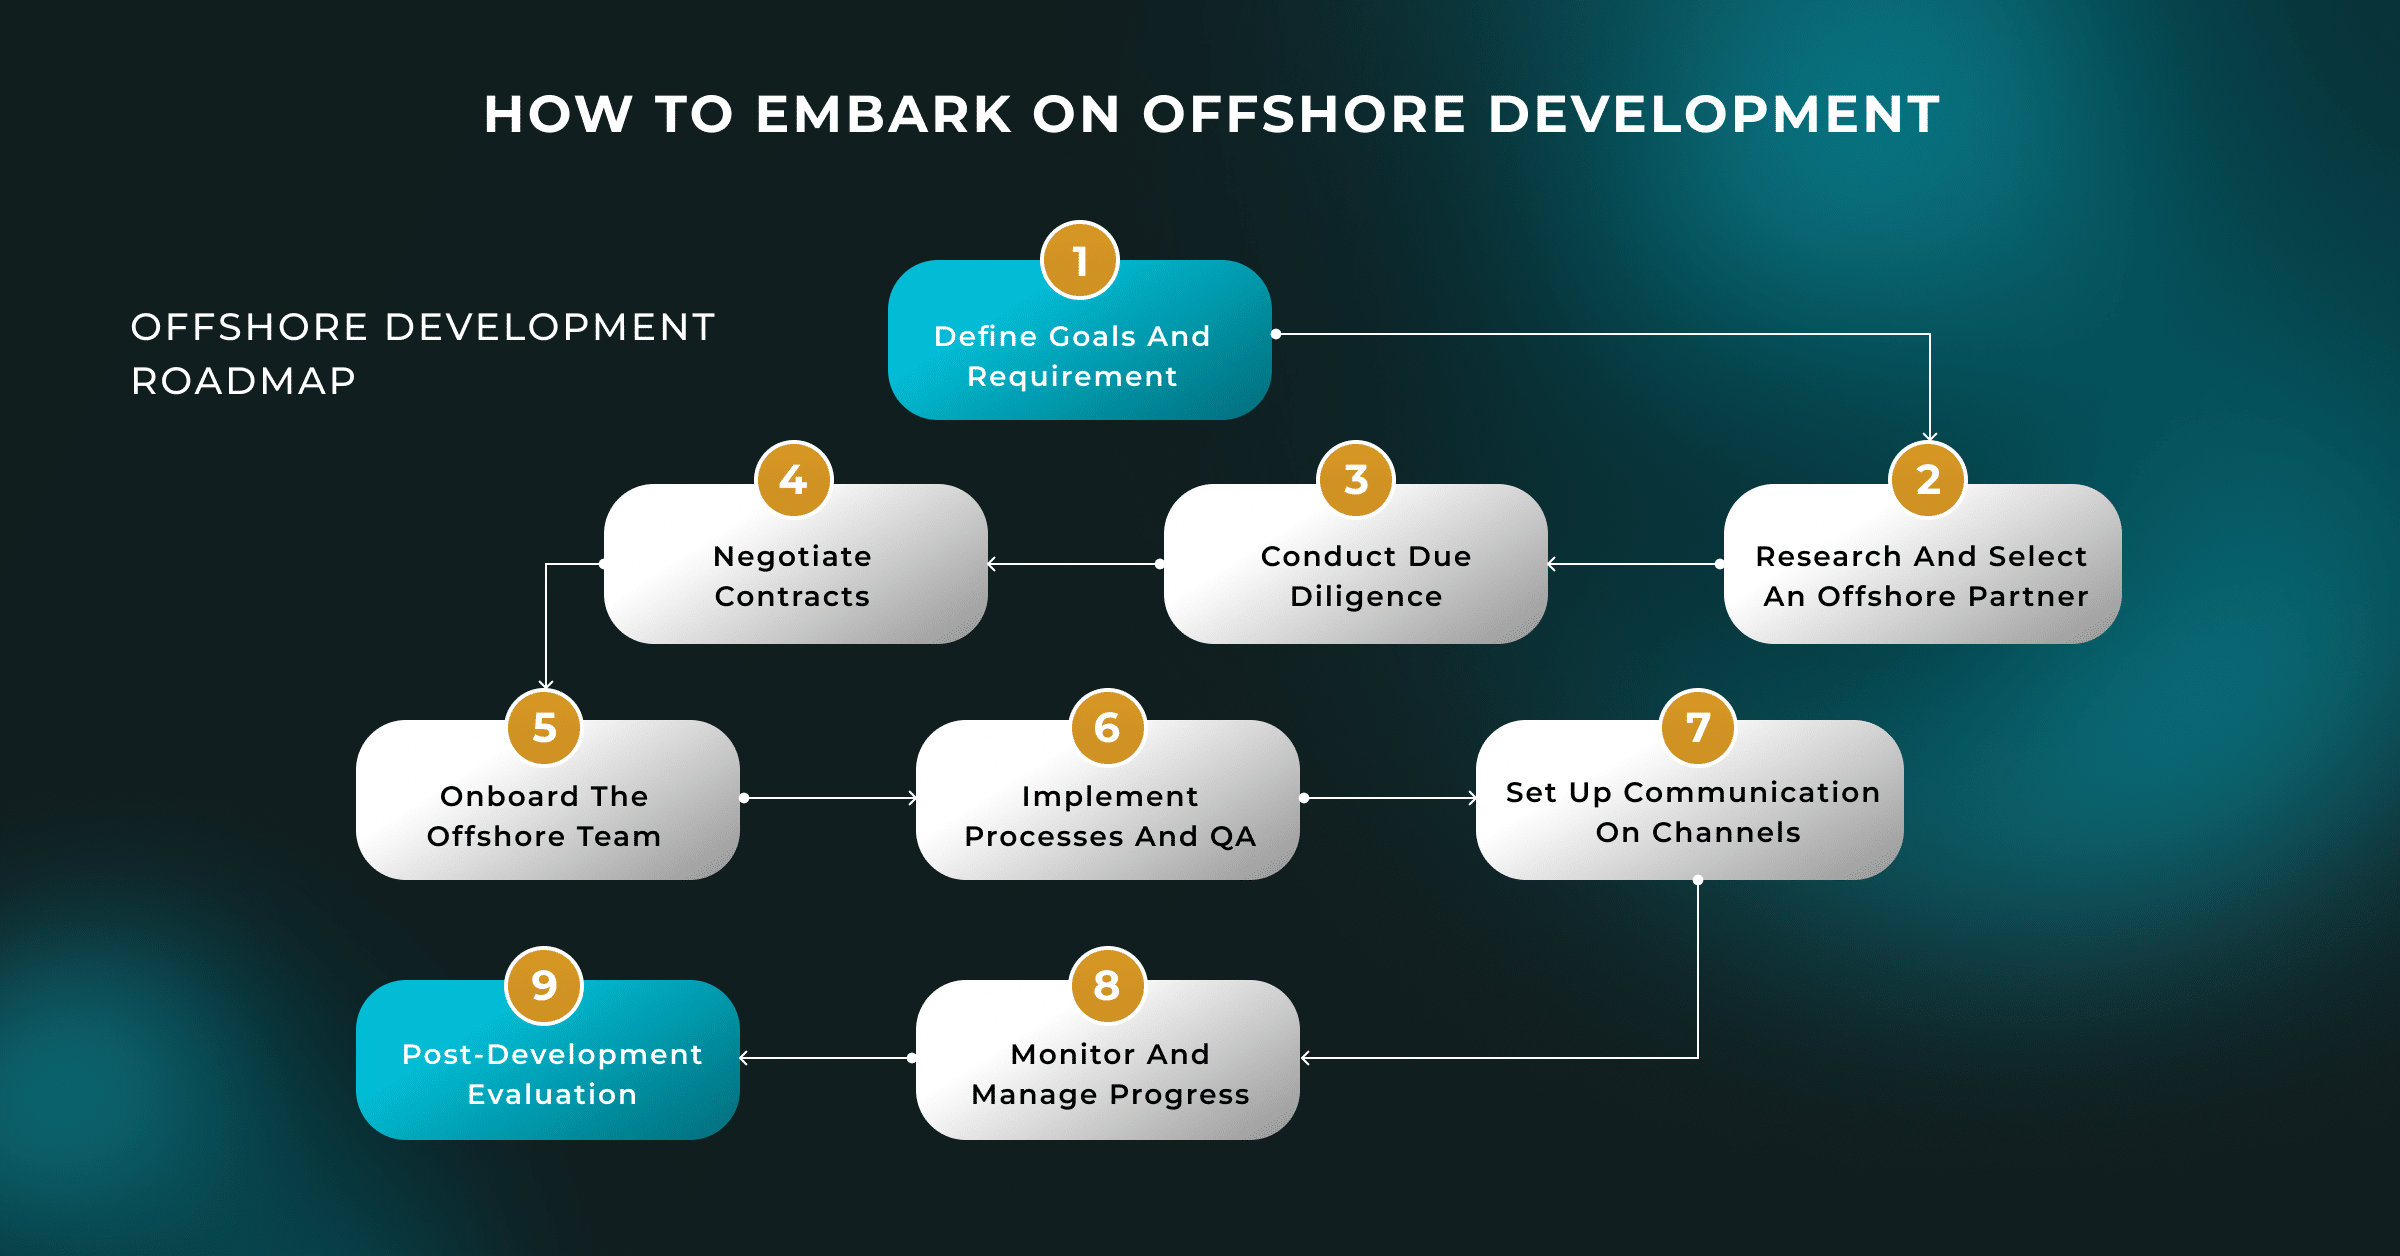 How to Embark On Offshore Development